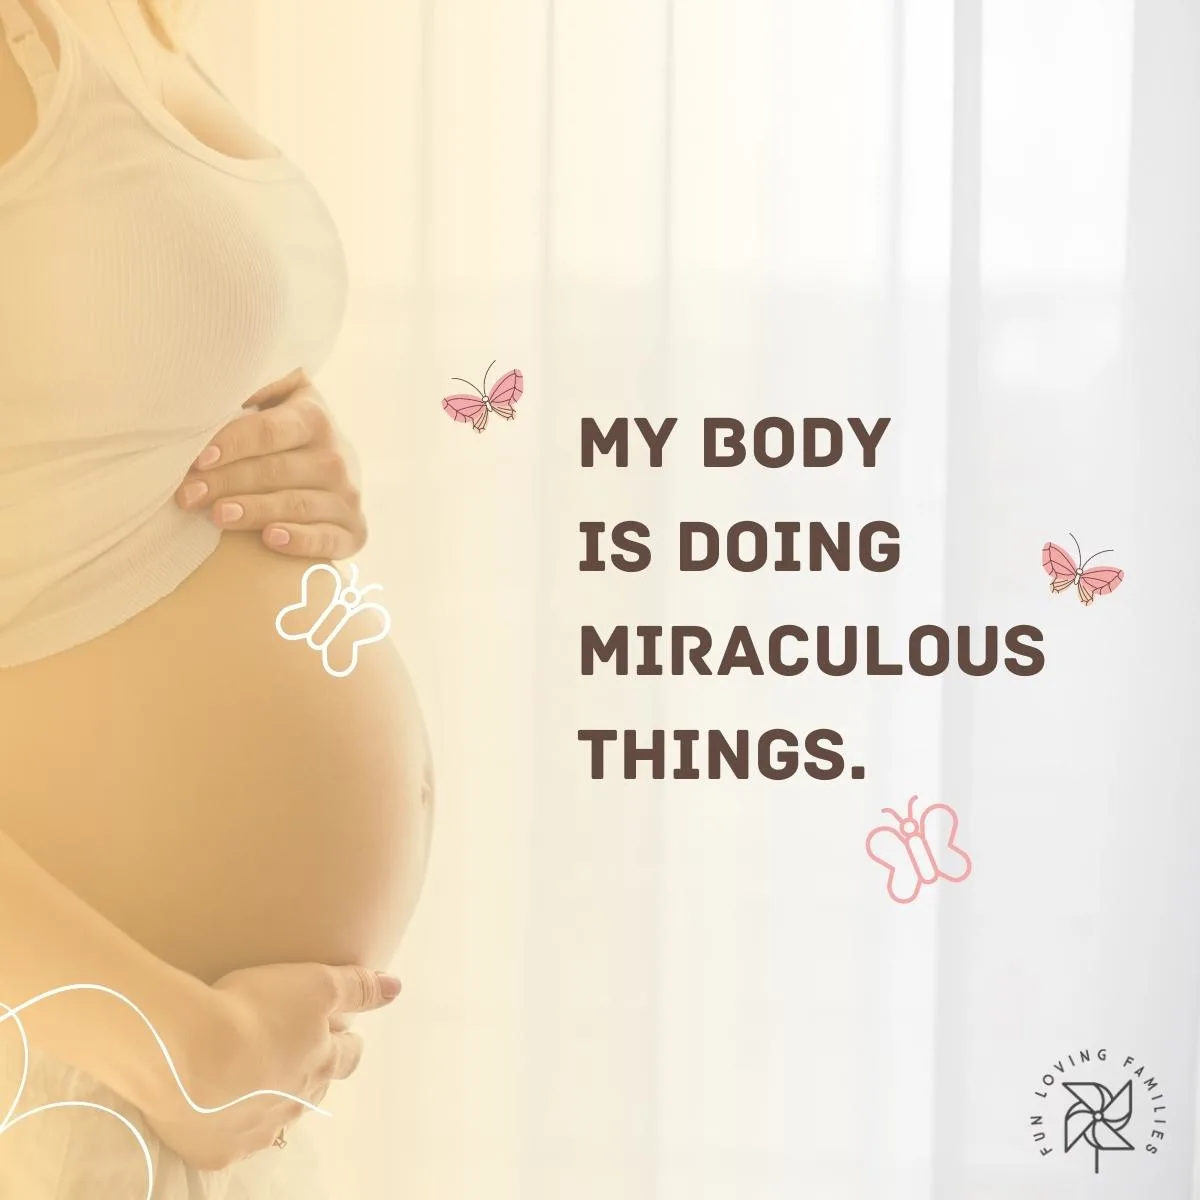 My body is doing miraculous things affirmation